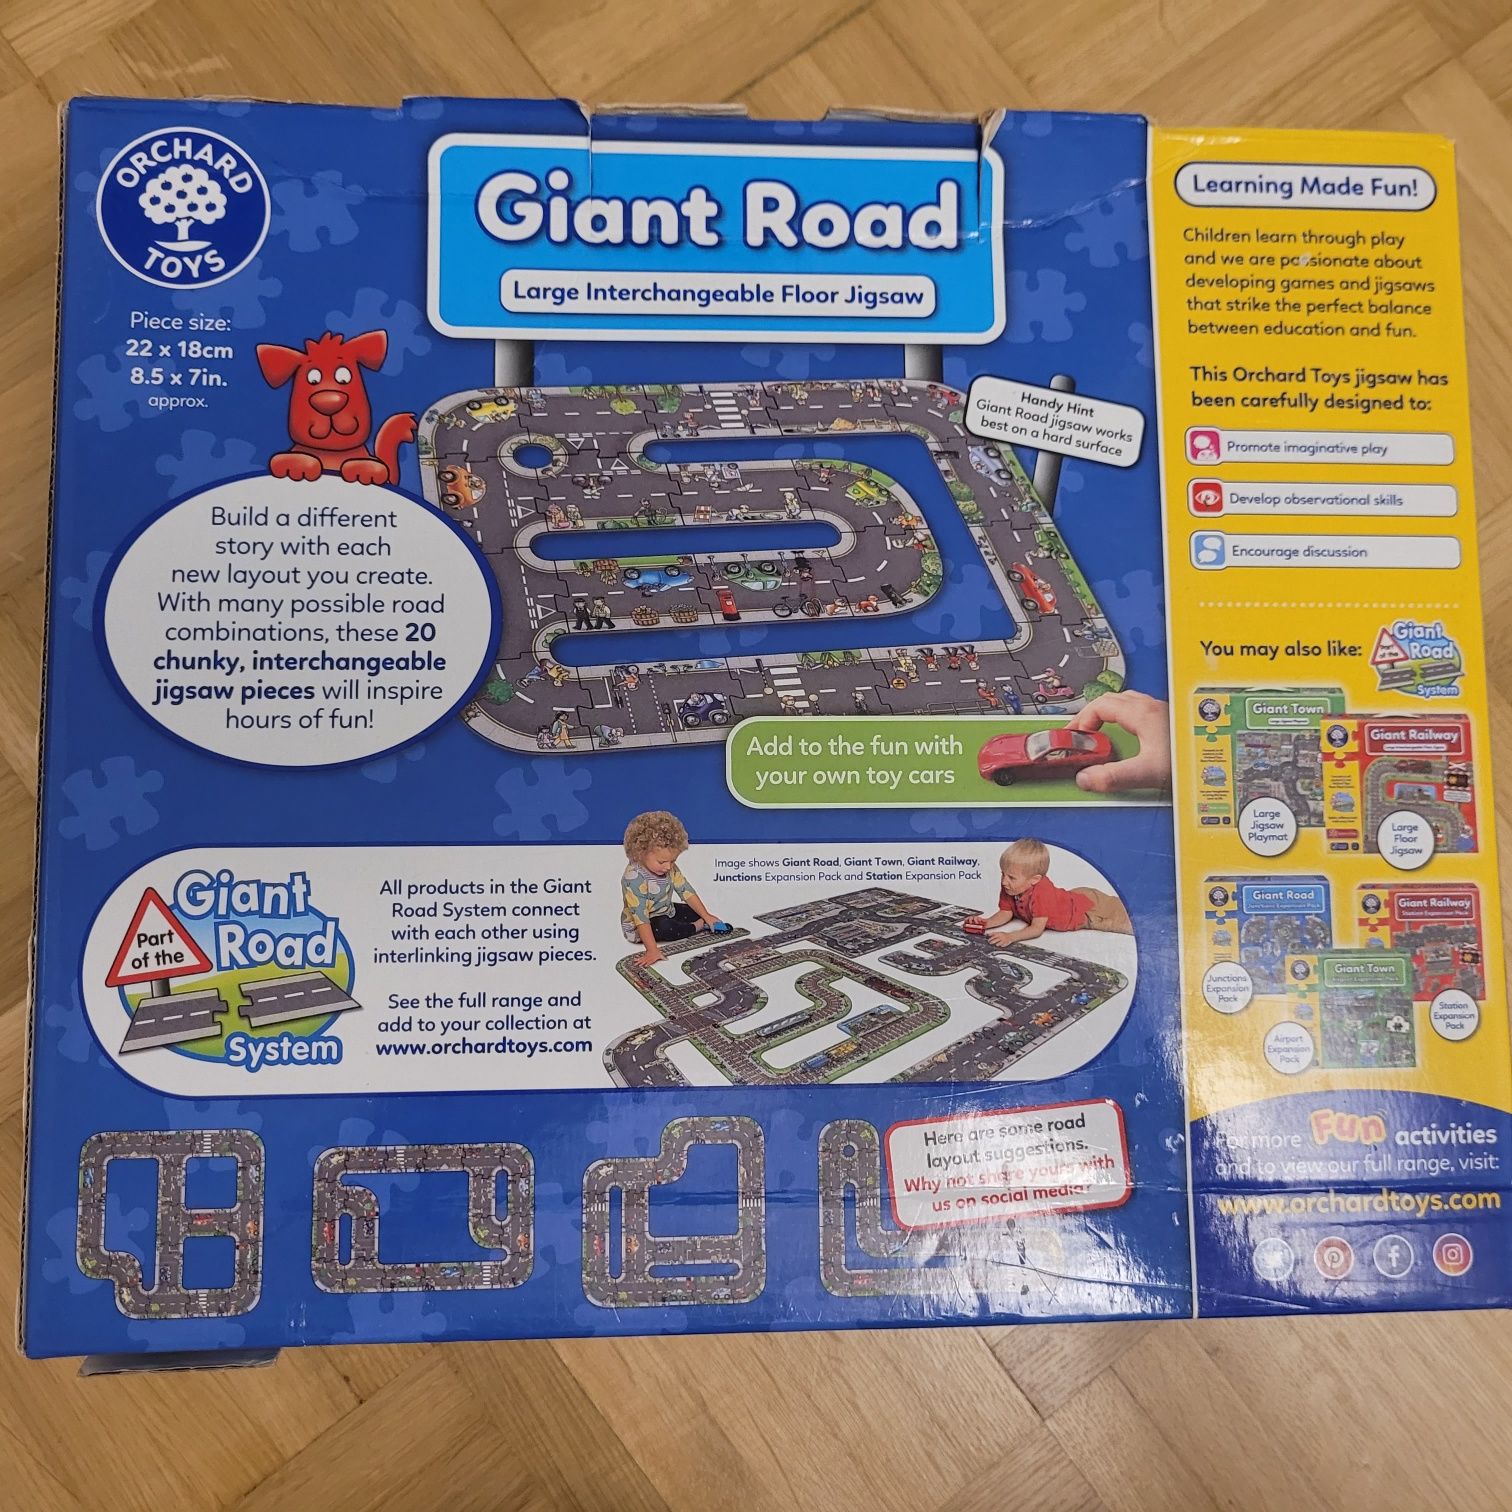 Orchard Toys Giant Road ulica droga puzzle obserwacyjne